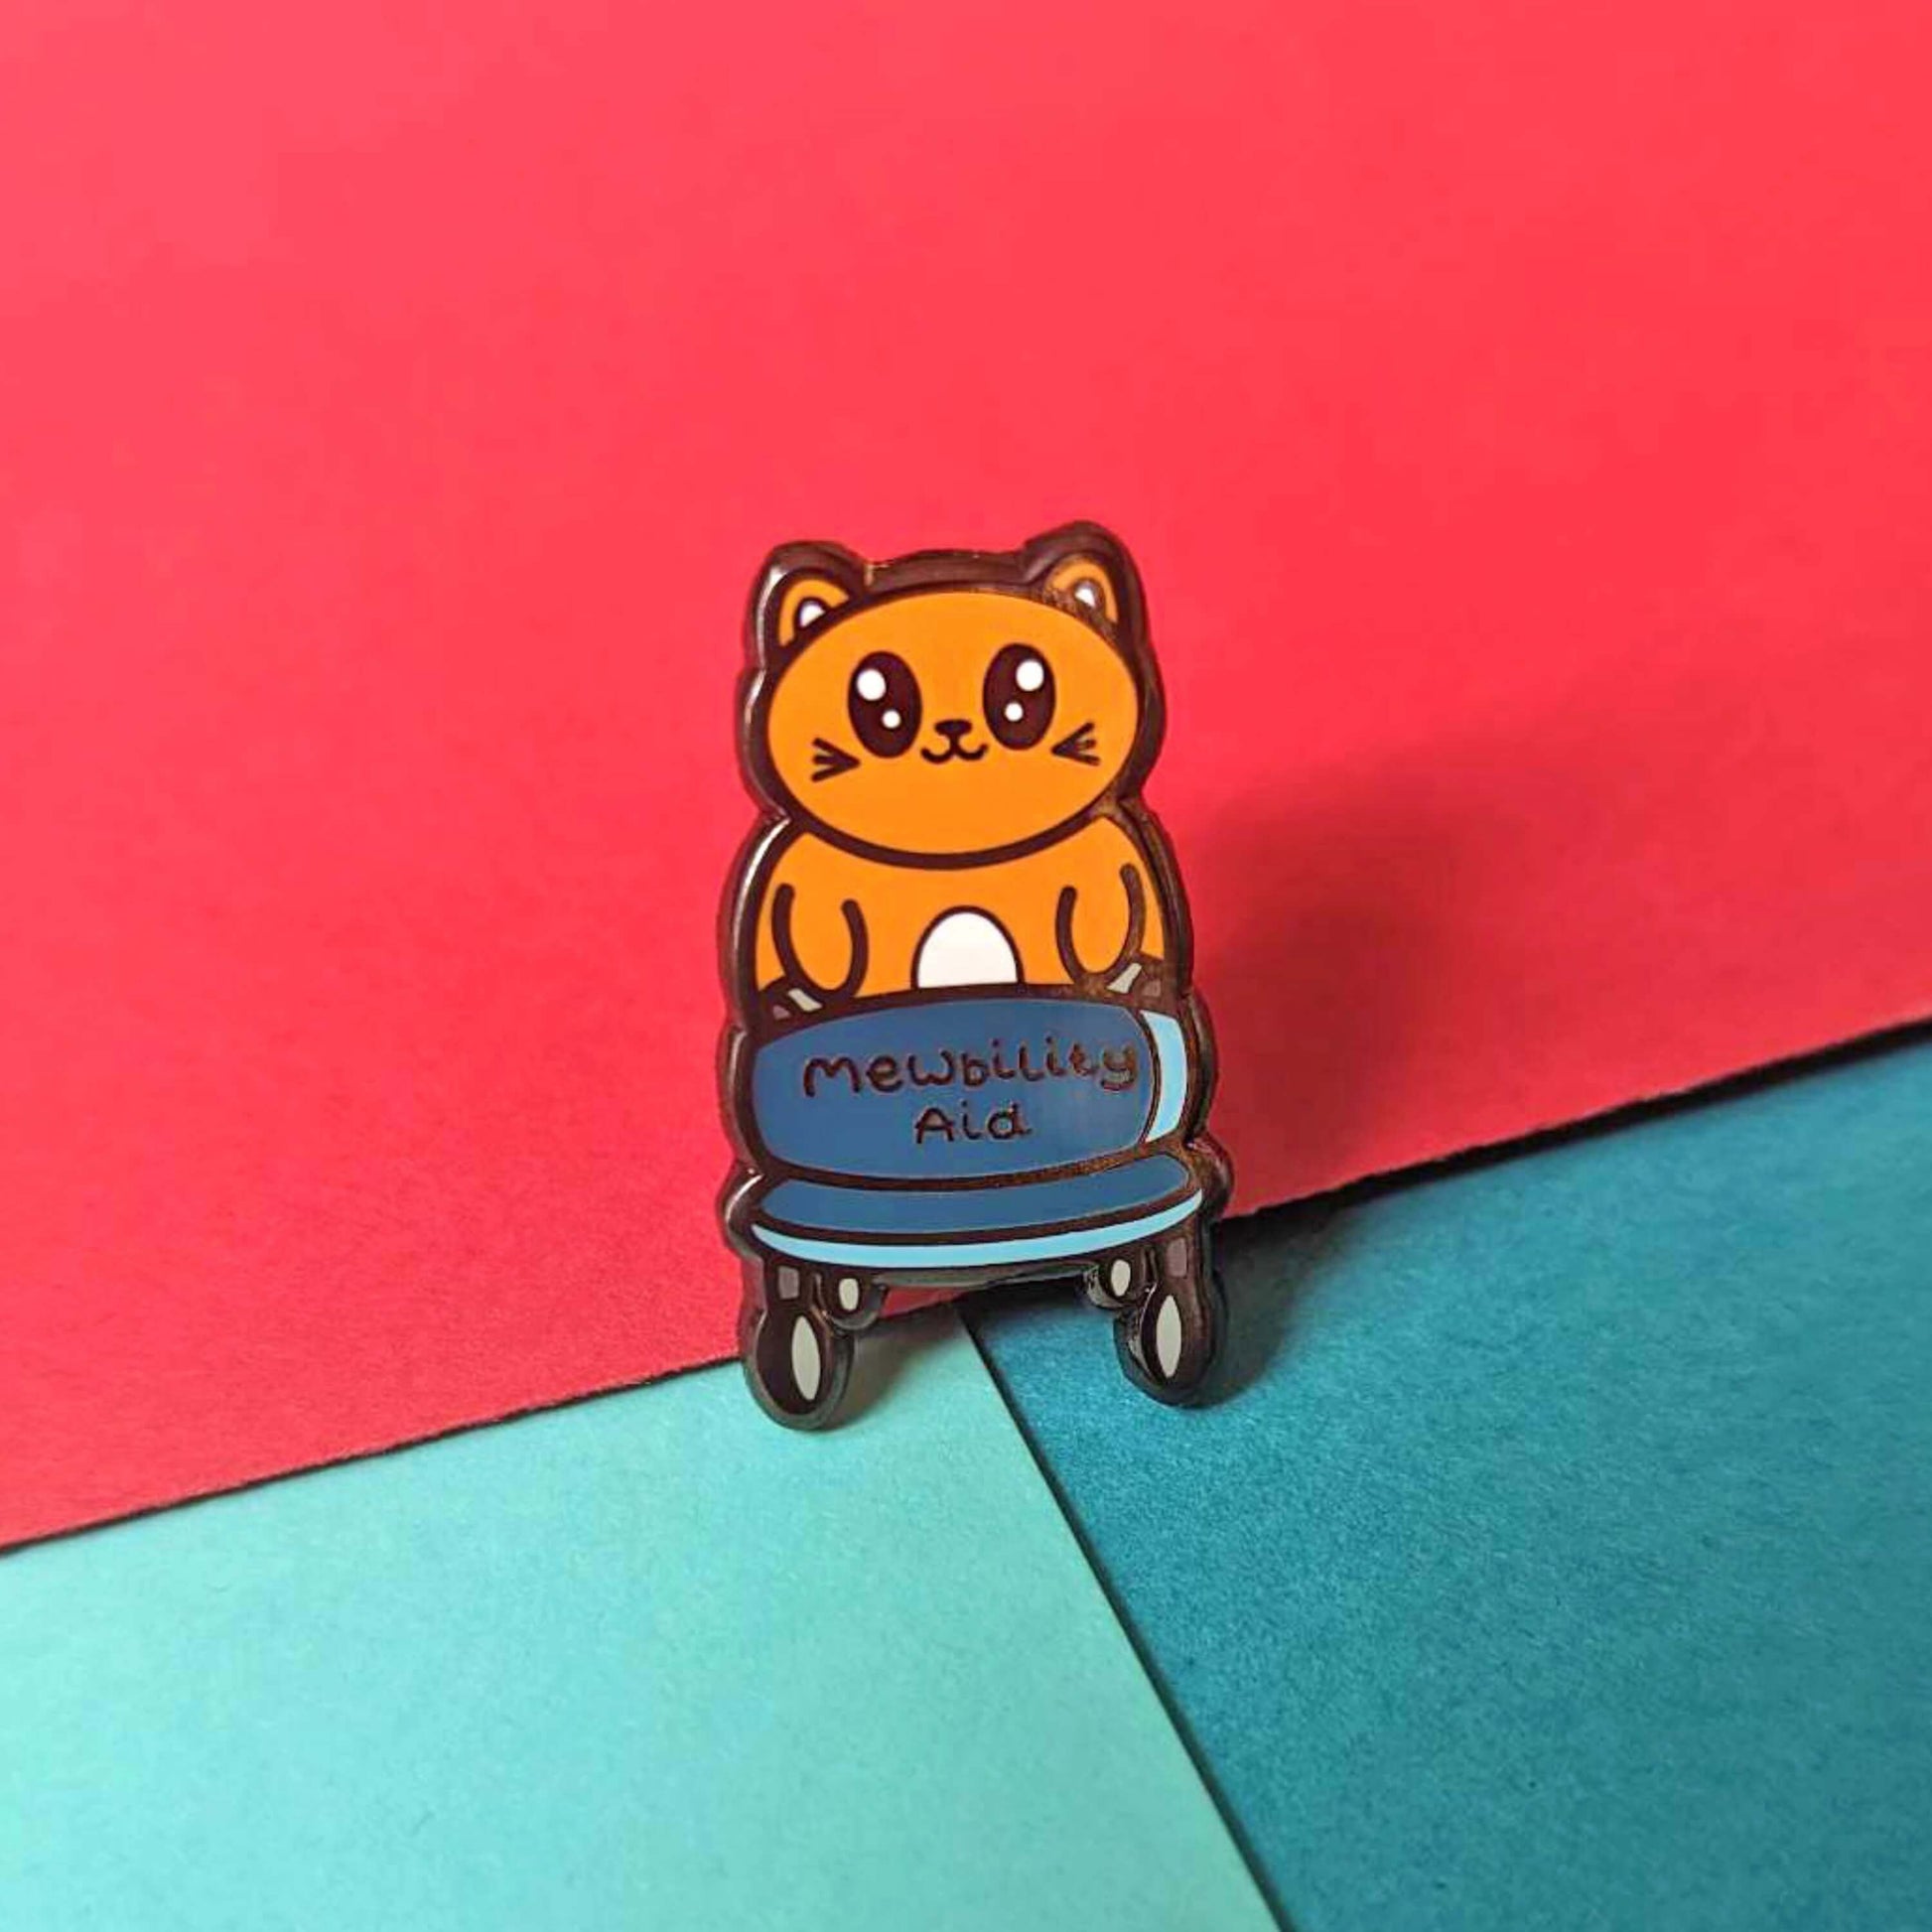 The Mewbility Aid Cat Enamel Pin - Mobility Aid on a red and blue background. An orange smiling cat walking upright with a blue mobility aid, across the walking chair reads 'mewbility aid'. The hand drawn designs is raising awareness for mobility aids.